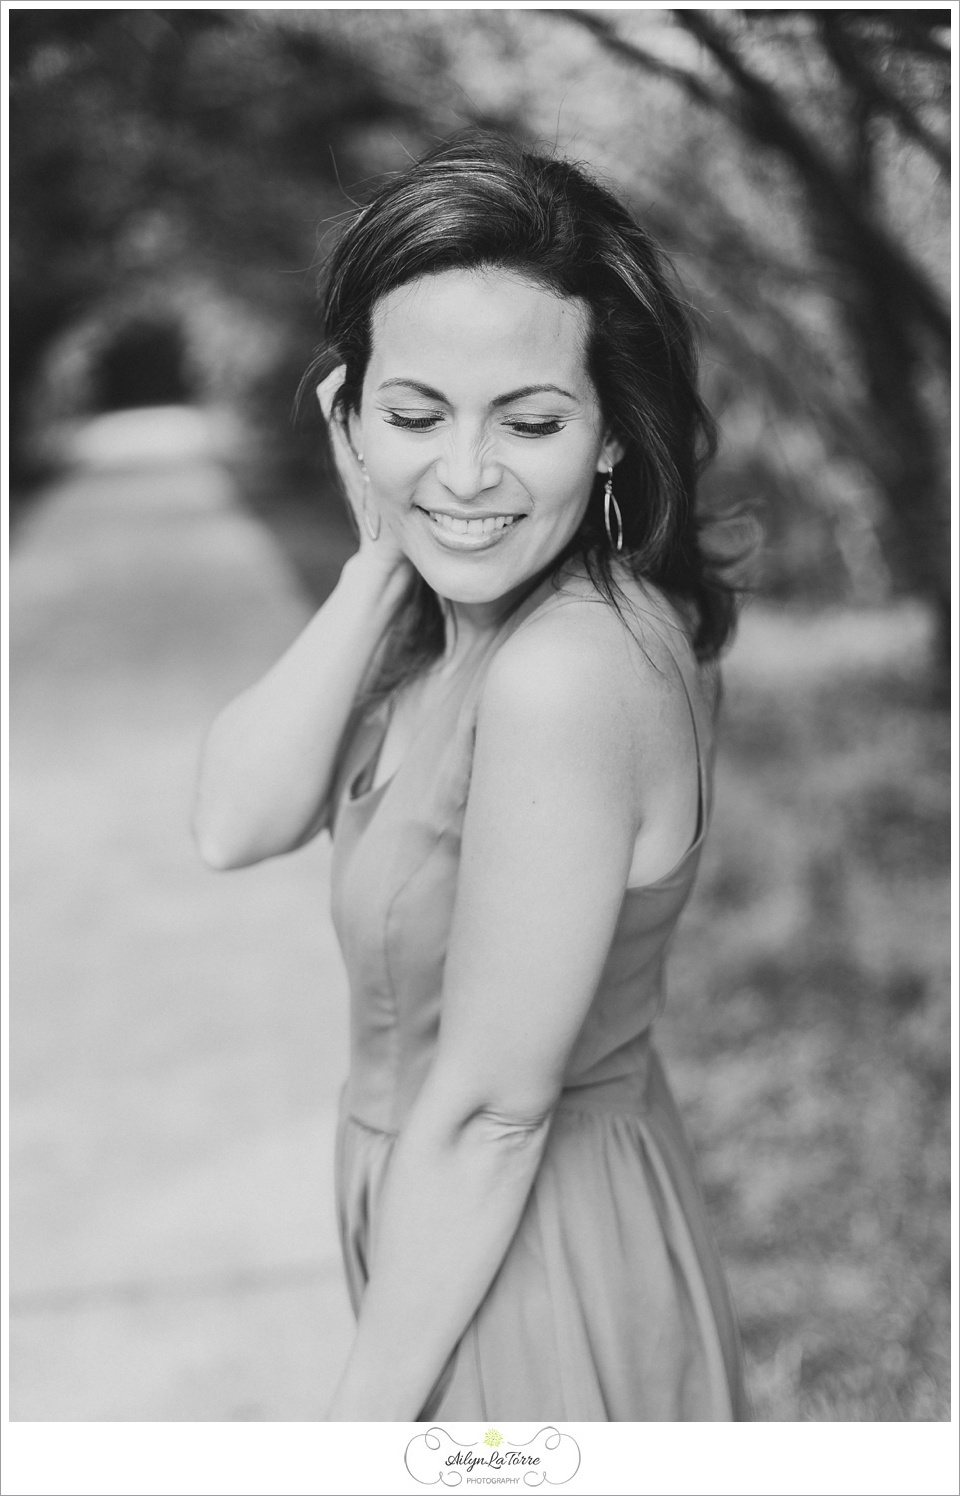 Tampa Photographer | © Photos by Ailyn La Torre Photography 2014